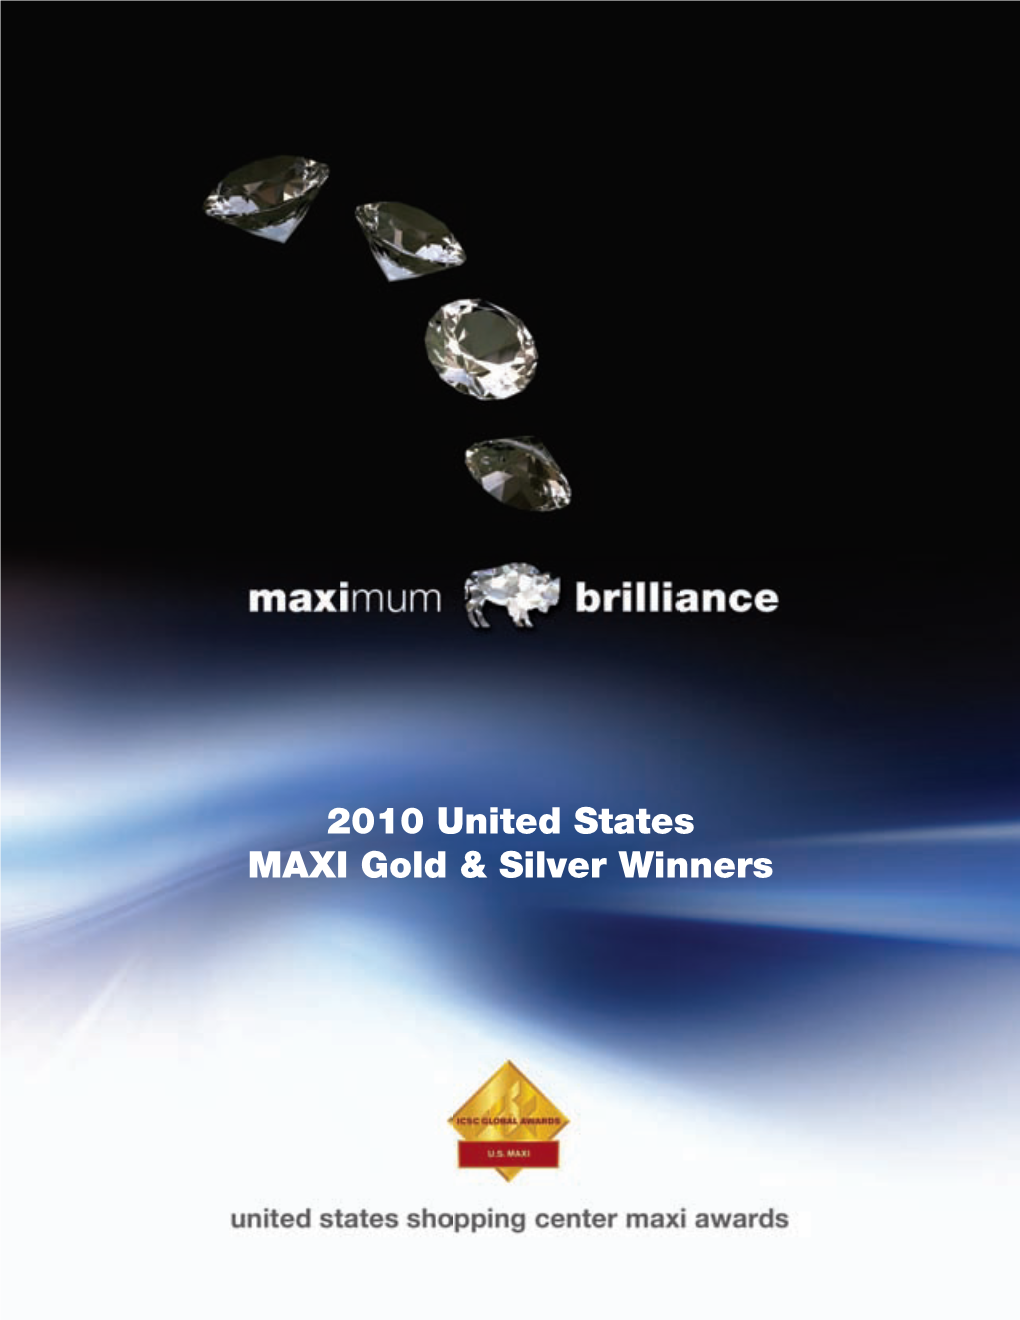 2010 United States MAXI Gold & Silver Winners